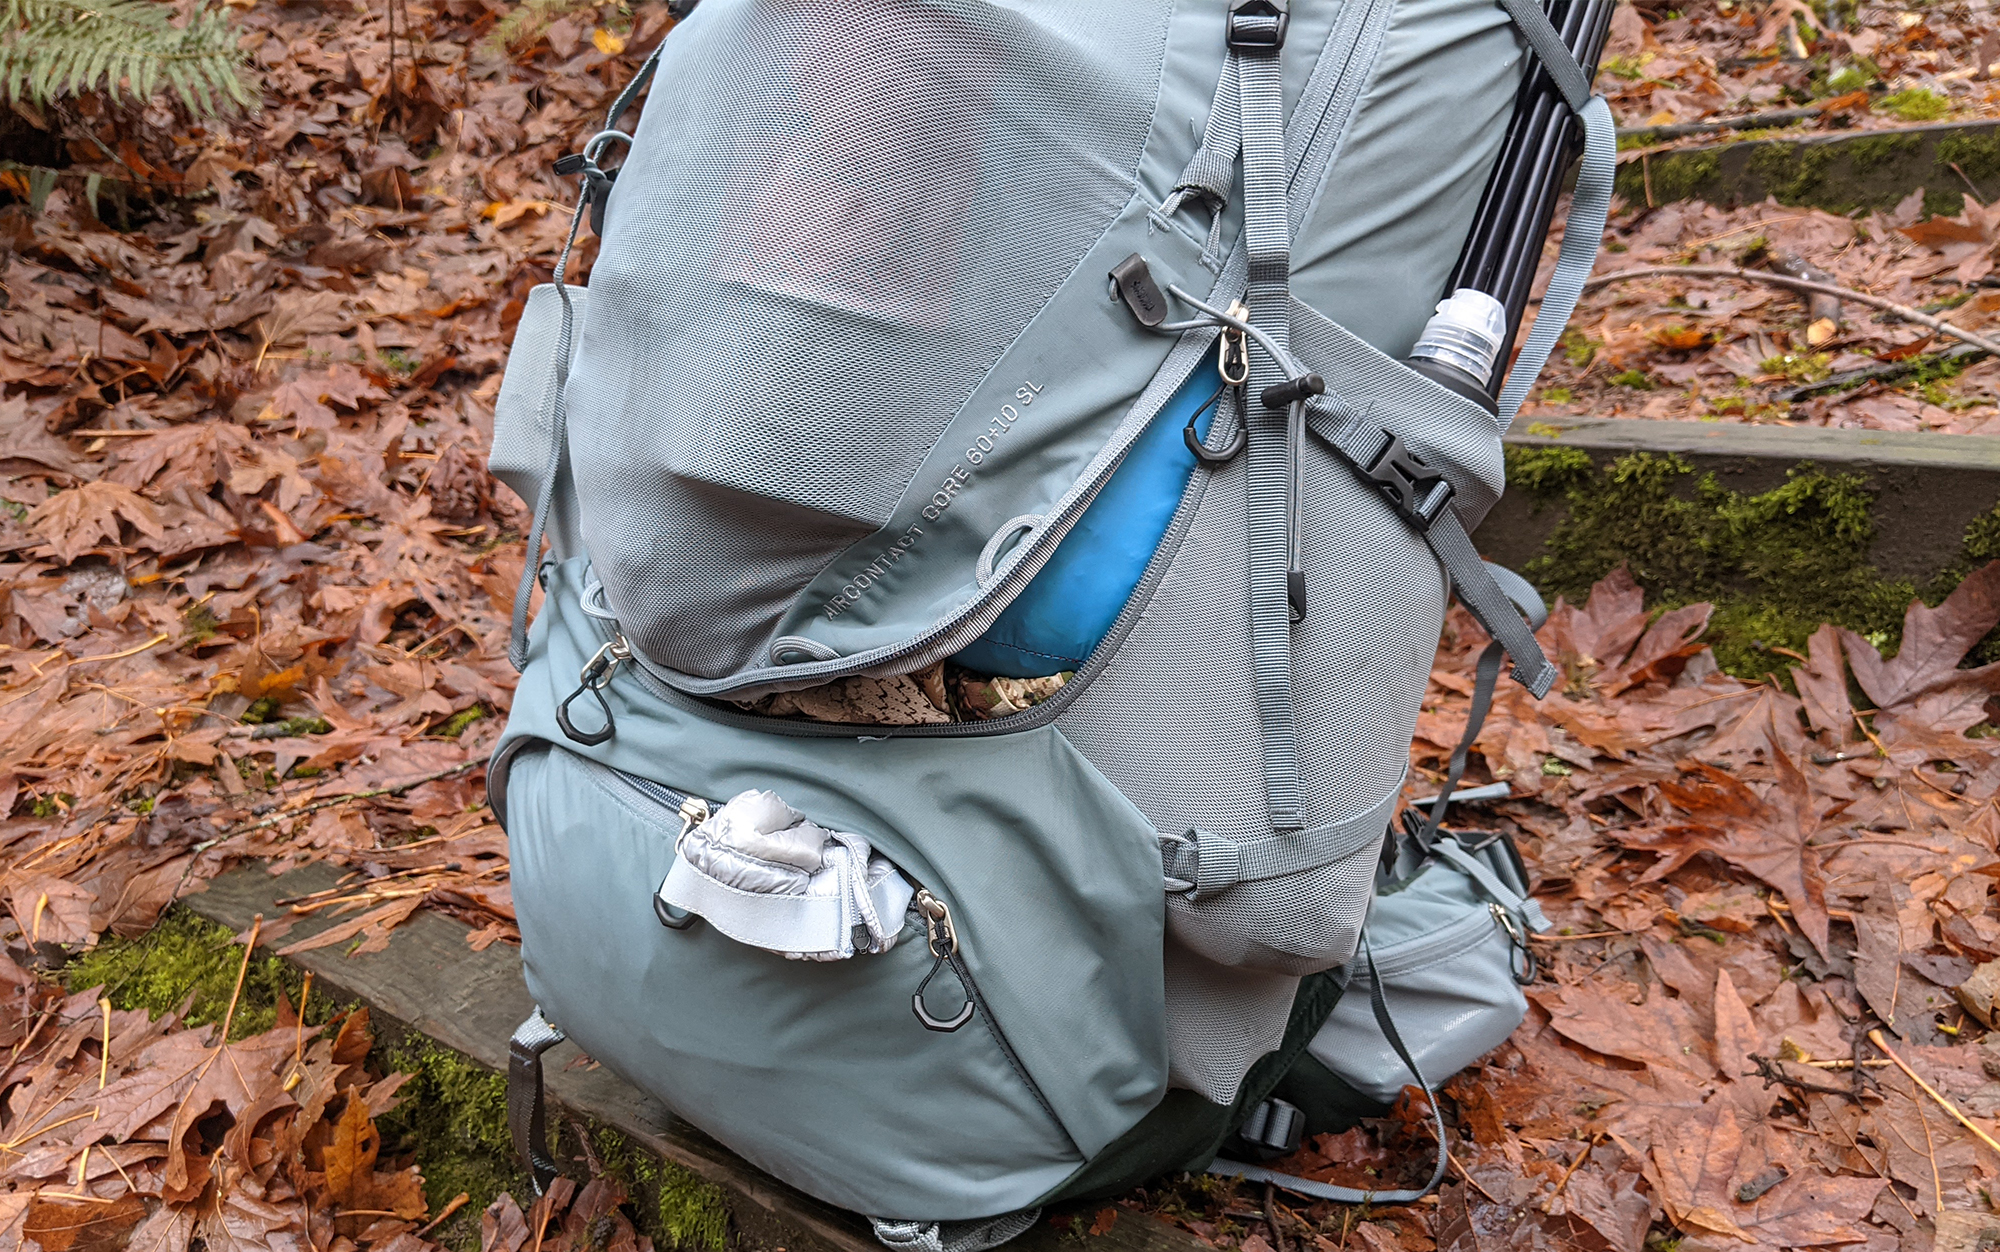 The Deuter Aircontact has three entry points to the pack, unusual for a backpacking backpack. 